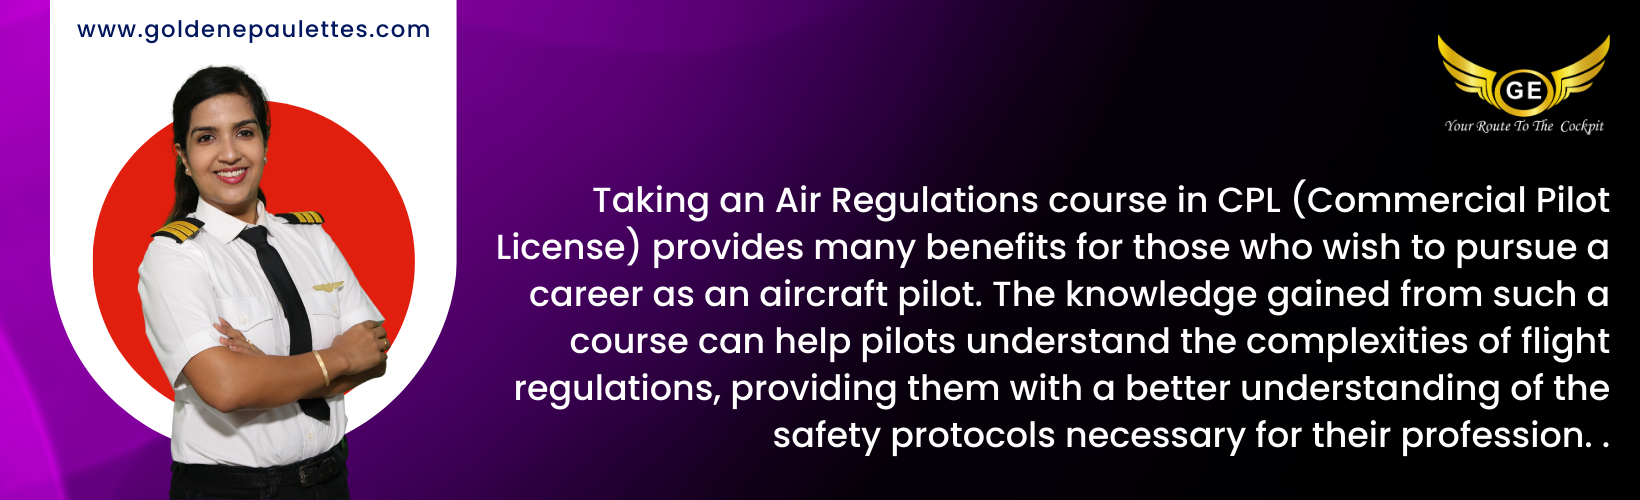 What are the Benefits of Taking an Air Regulations Course in CPL